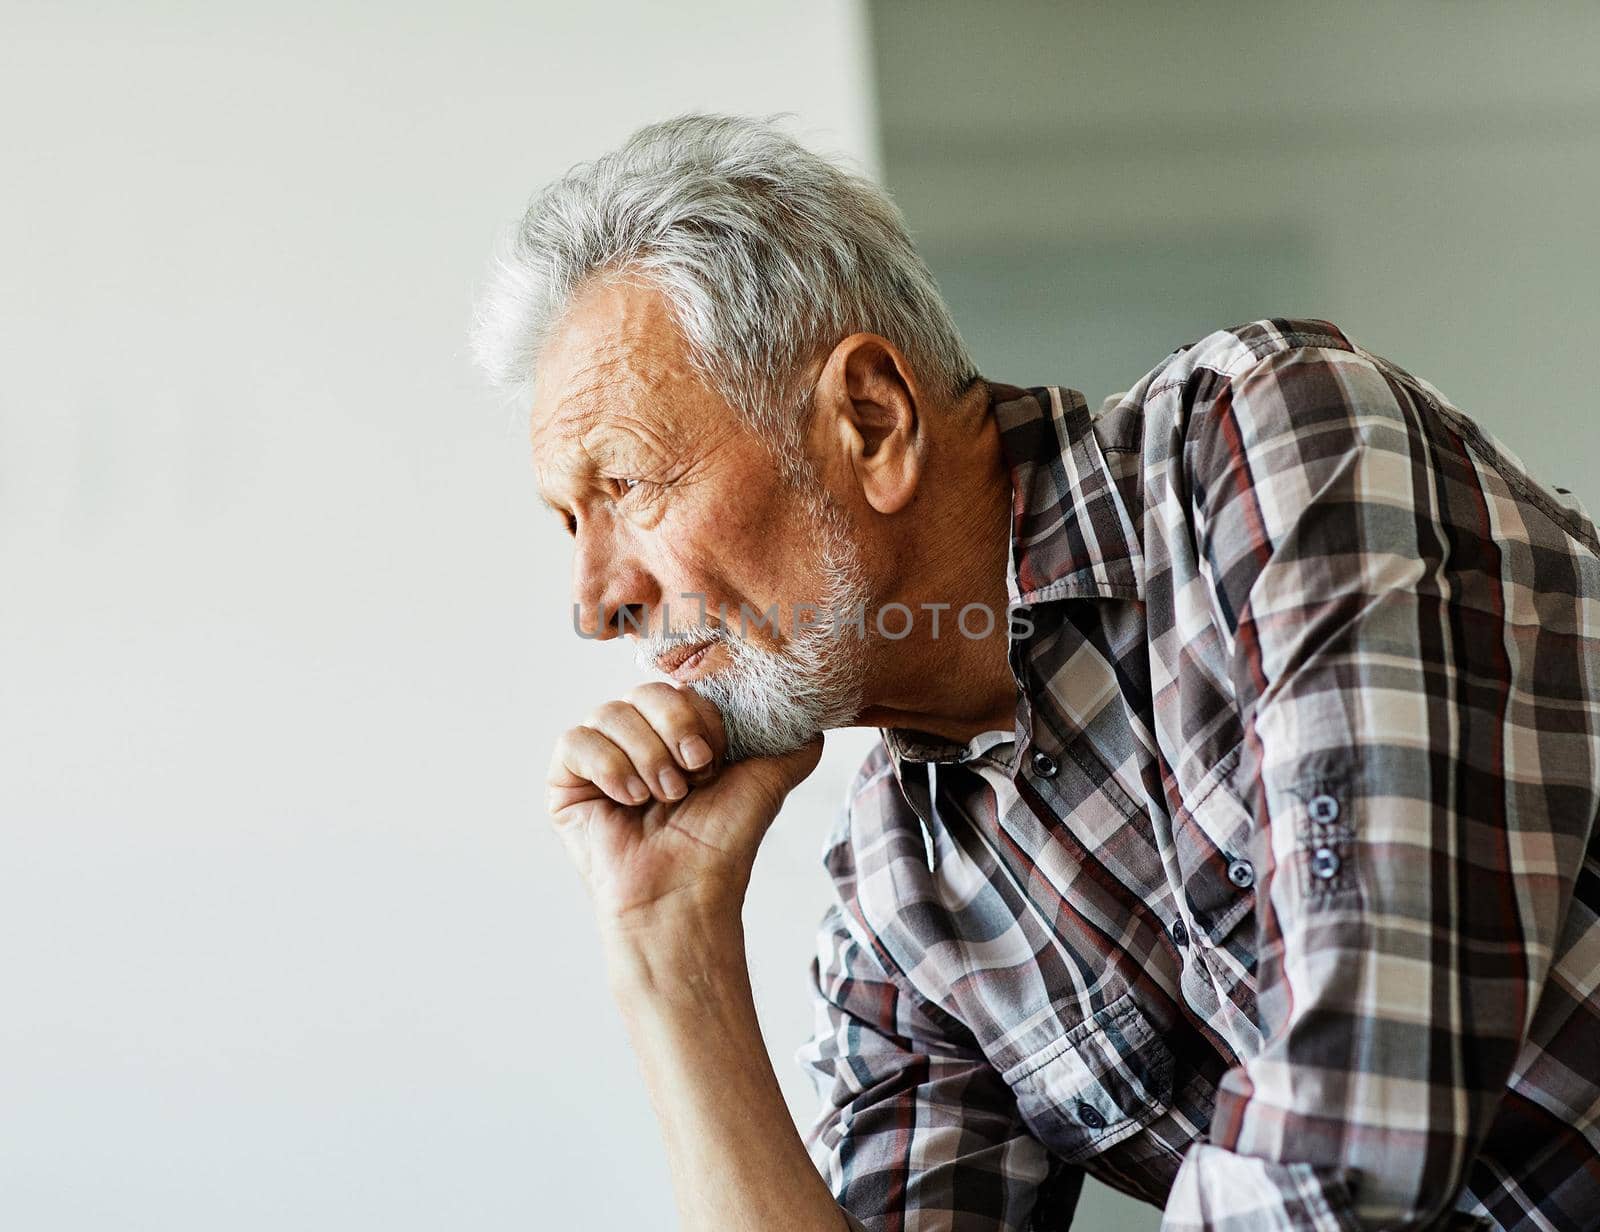 portrait senior man elderly old retirement mature gray hair indoors serious vitality healthy active retired by Picsfive